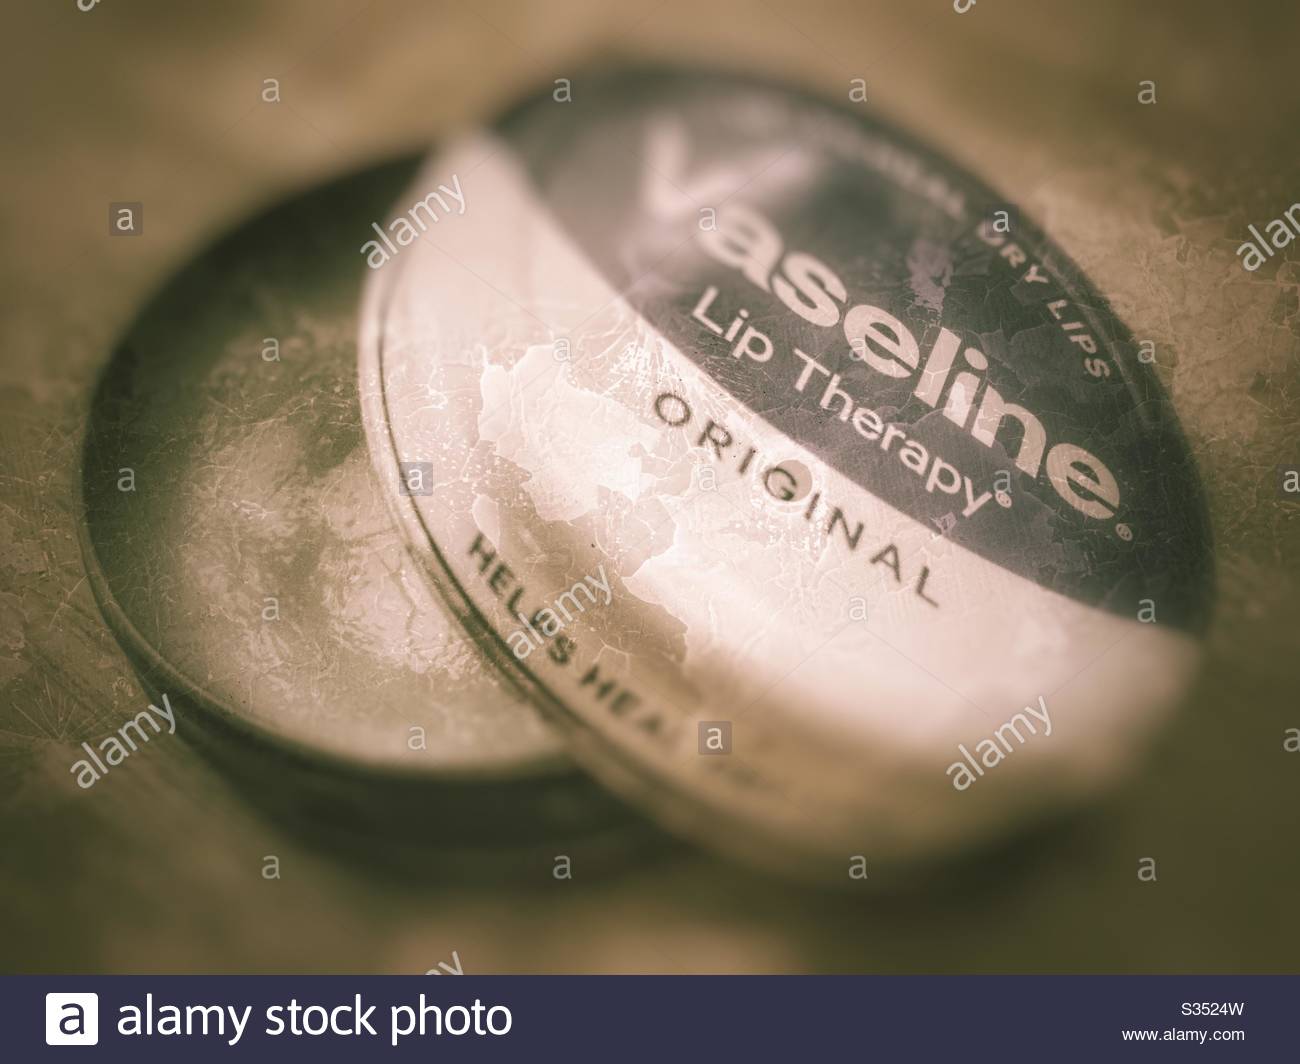 Download An Open Tin Container Of Vaseline Lip Balm The Image Is Made Of An Original Photograph By Myself Layers To Give It A Vintage Retro Feel Stock Photo Alamy Yellowimages Mockups